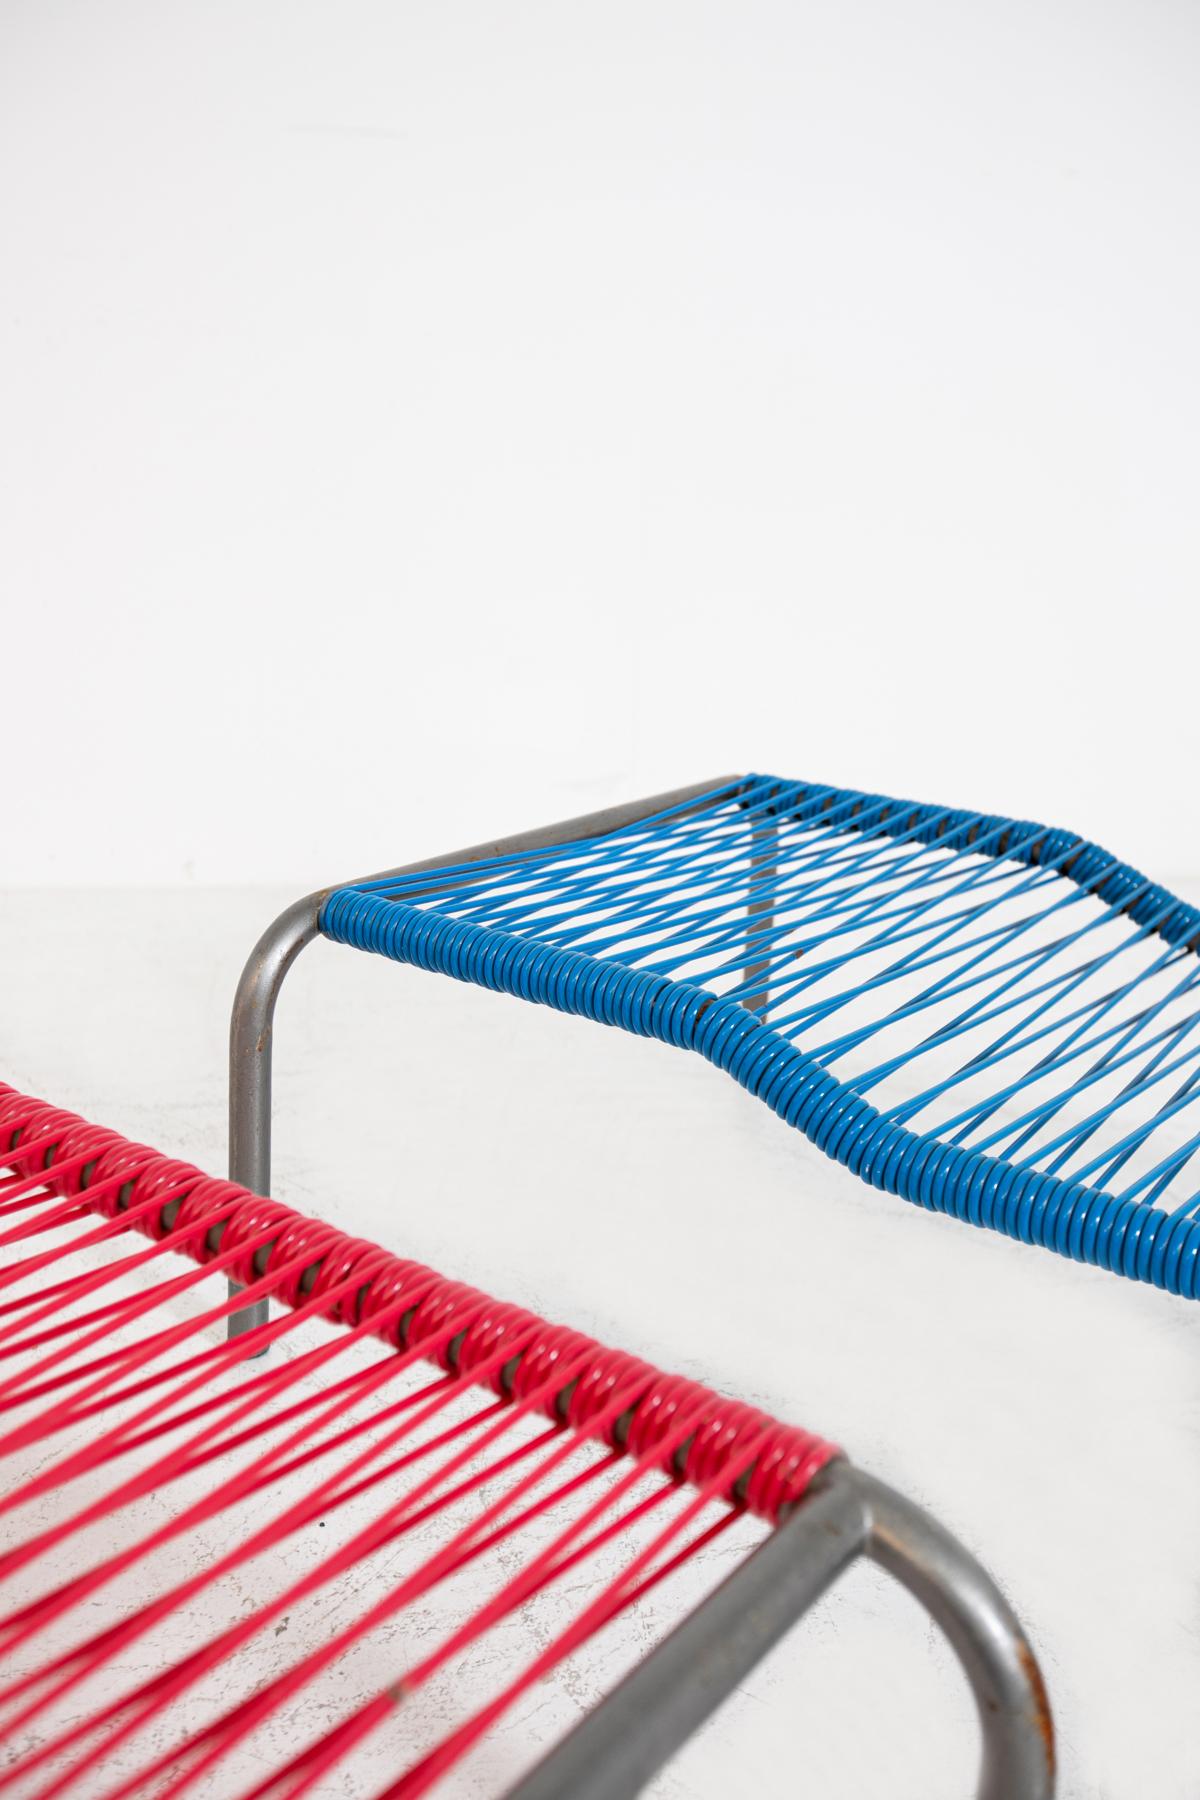 Mid-20th Century Pair of Italian Iron and Plastic Deckchairs Red and Blue